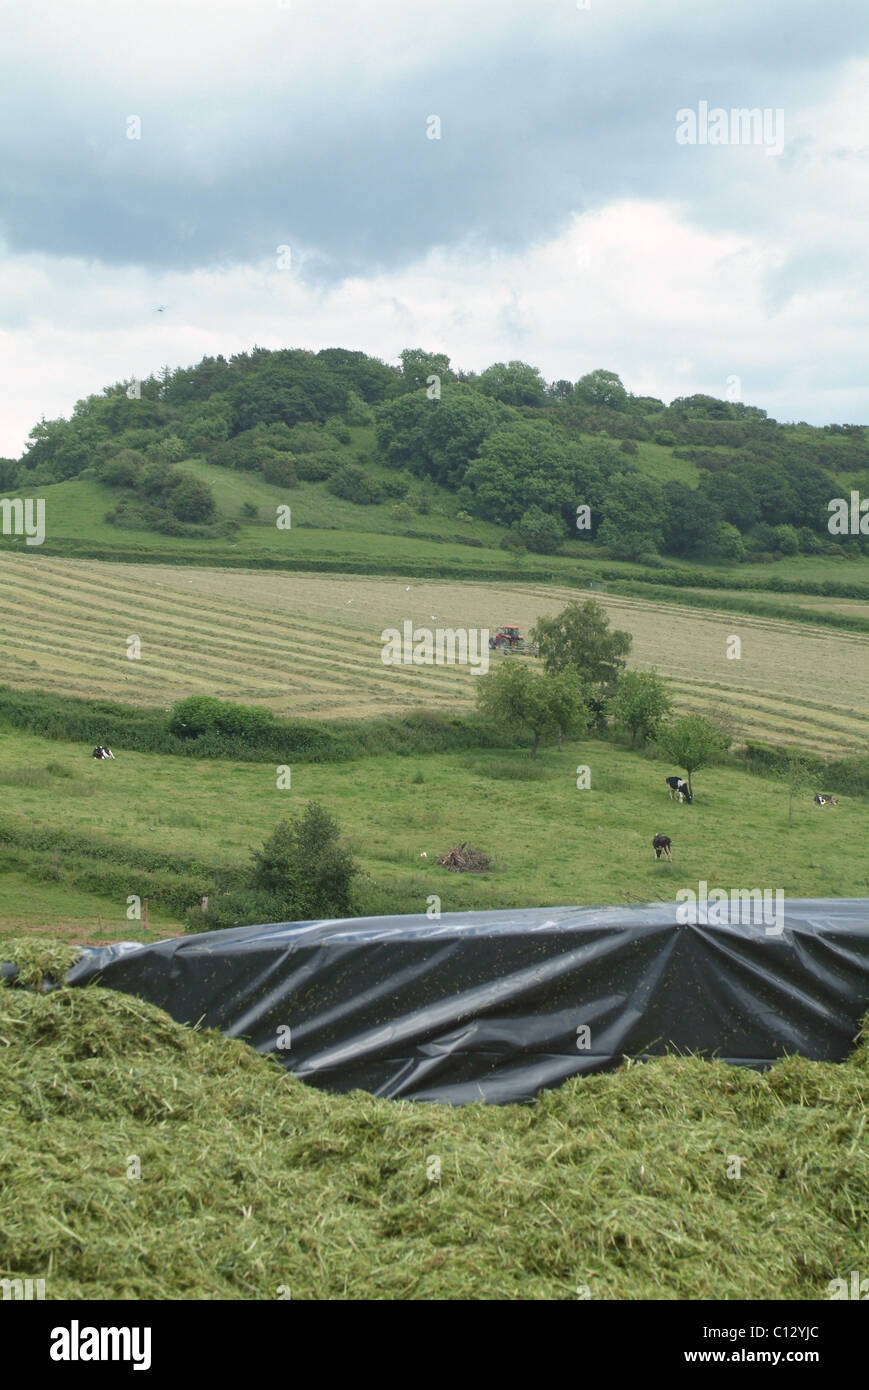 Silage pit with a view of a tractor turning grass for silage in the background Stock Photo